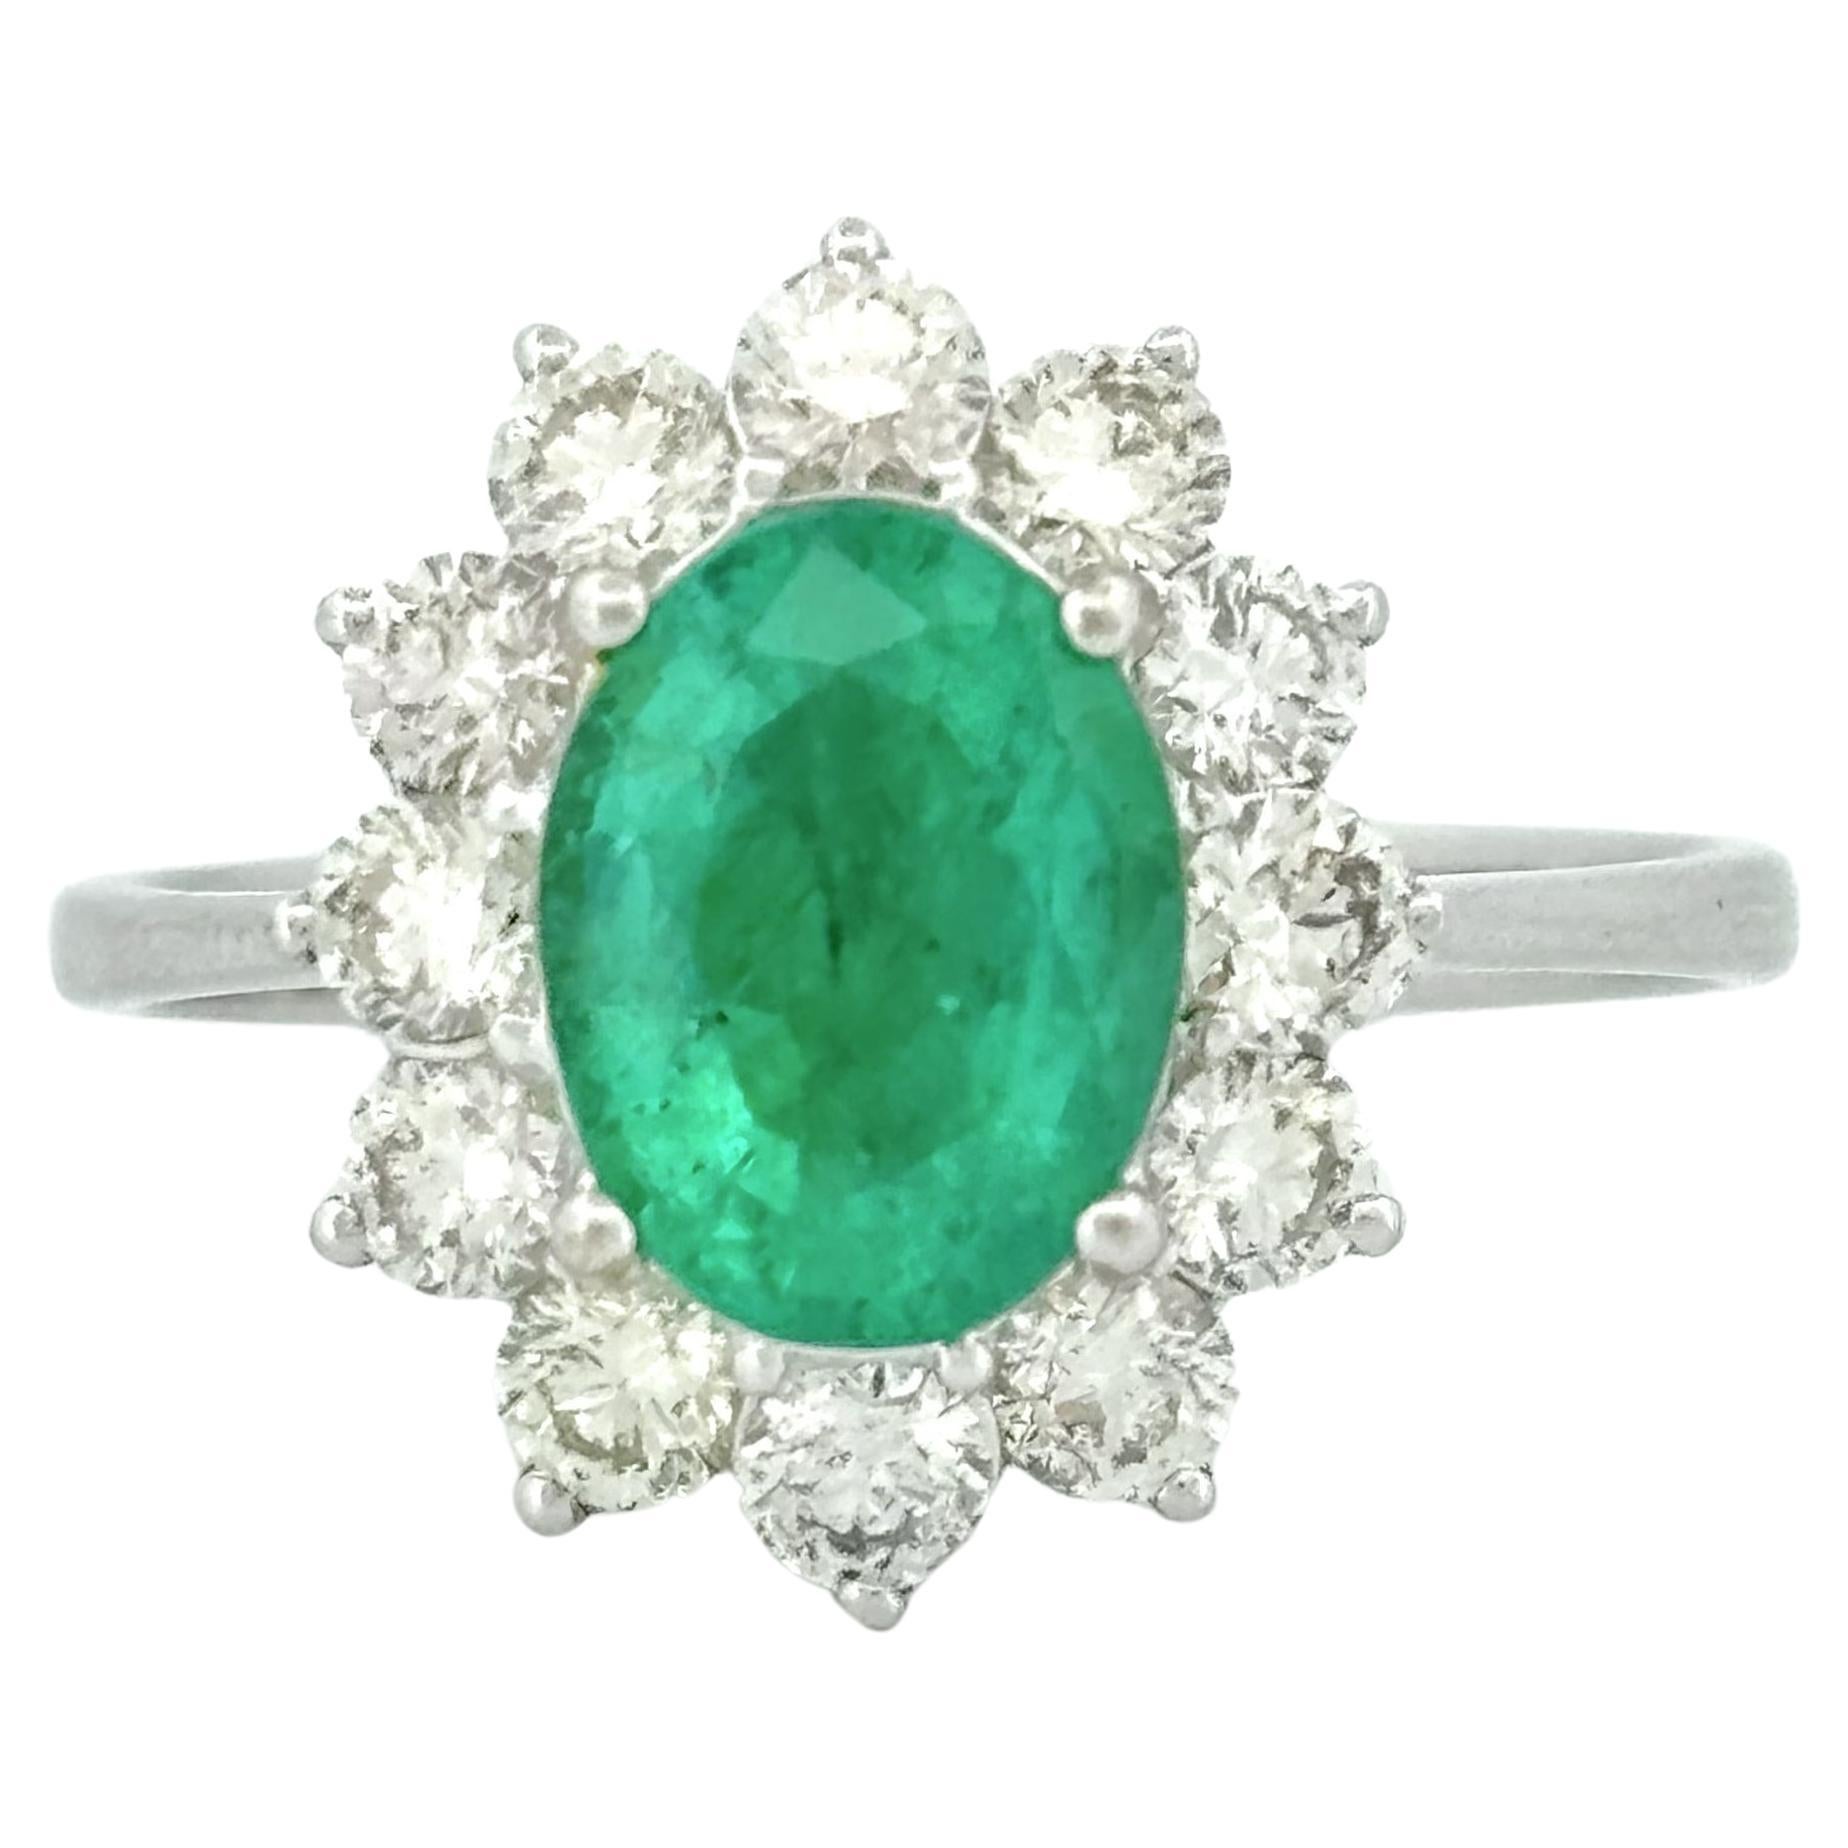 1.64 Ct Vivid Green Zambian Emerald with Halo Diamonds 18K White Gold Ring For Sale